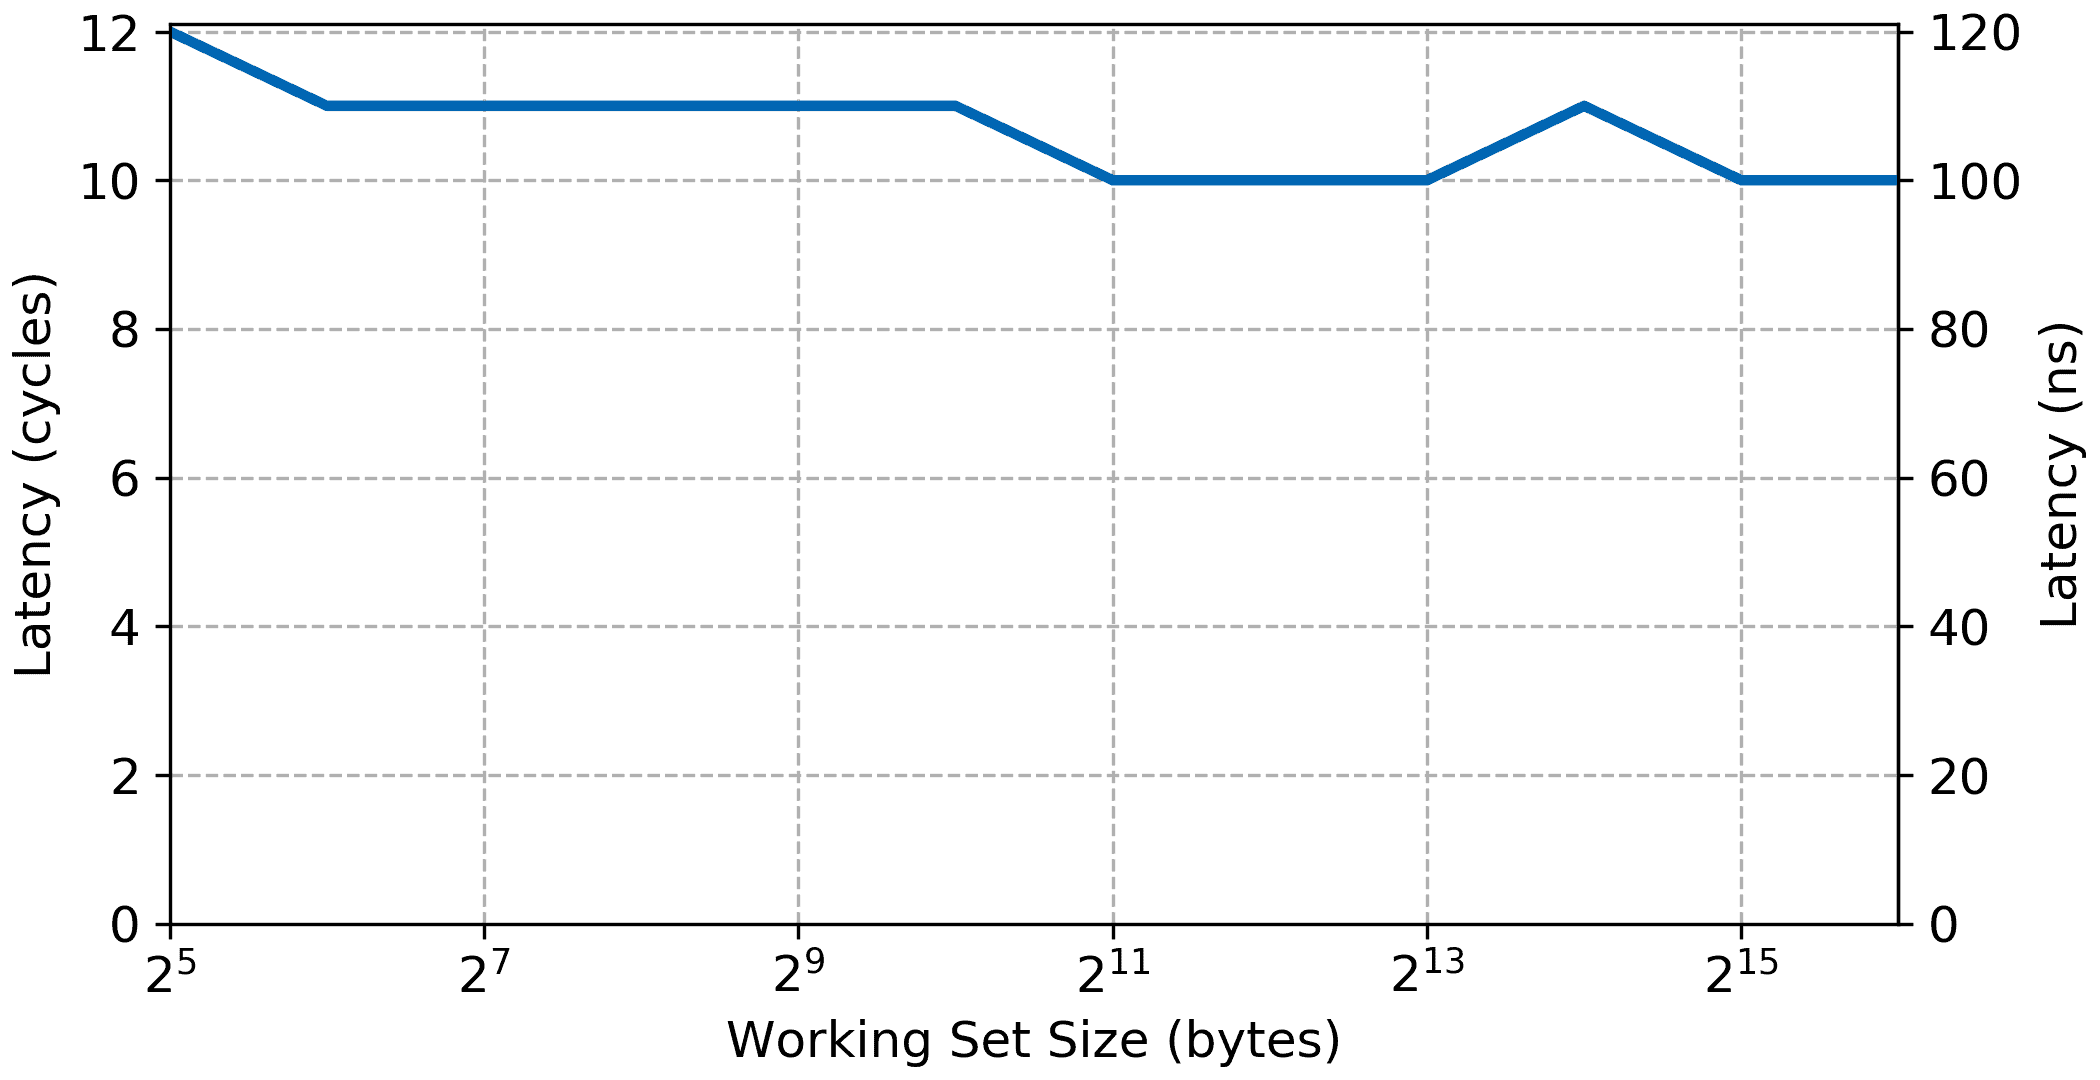 Plot of the Microblaze memory read access latency versus the working set size when running from block ram accessed through the AXI data interface.